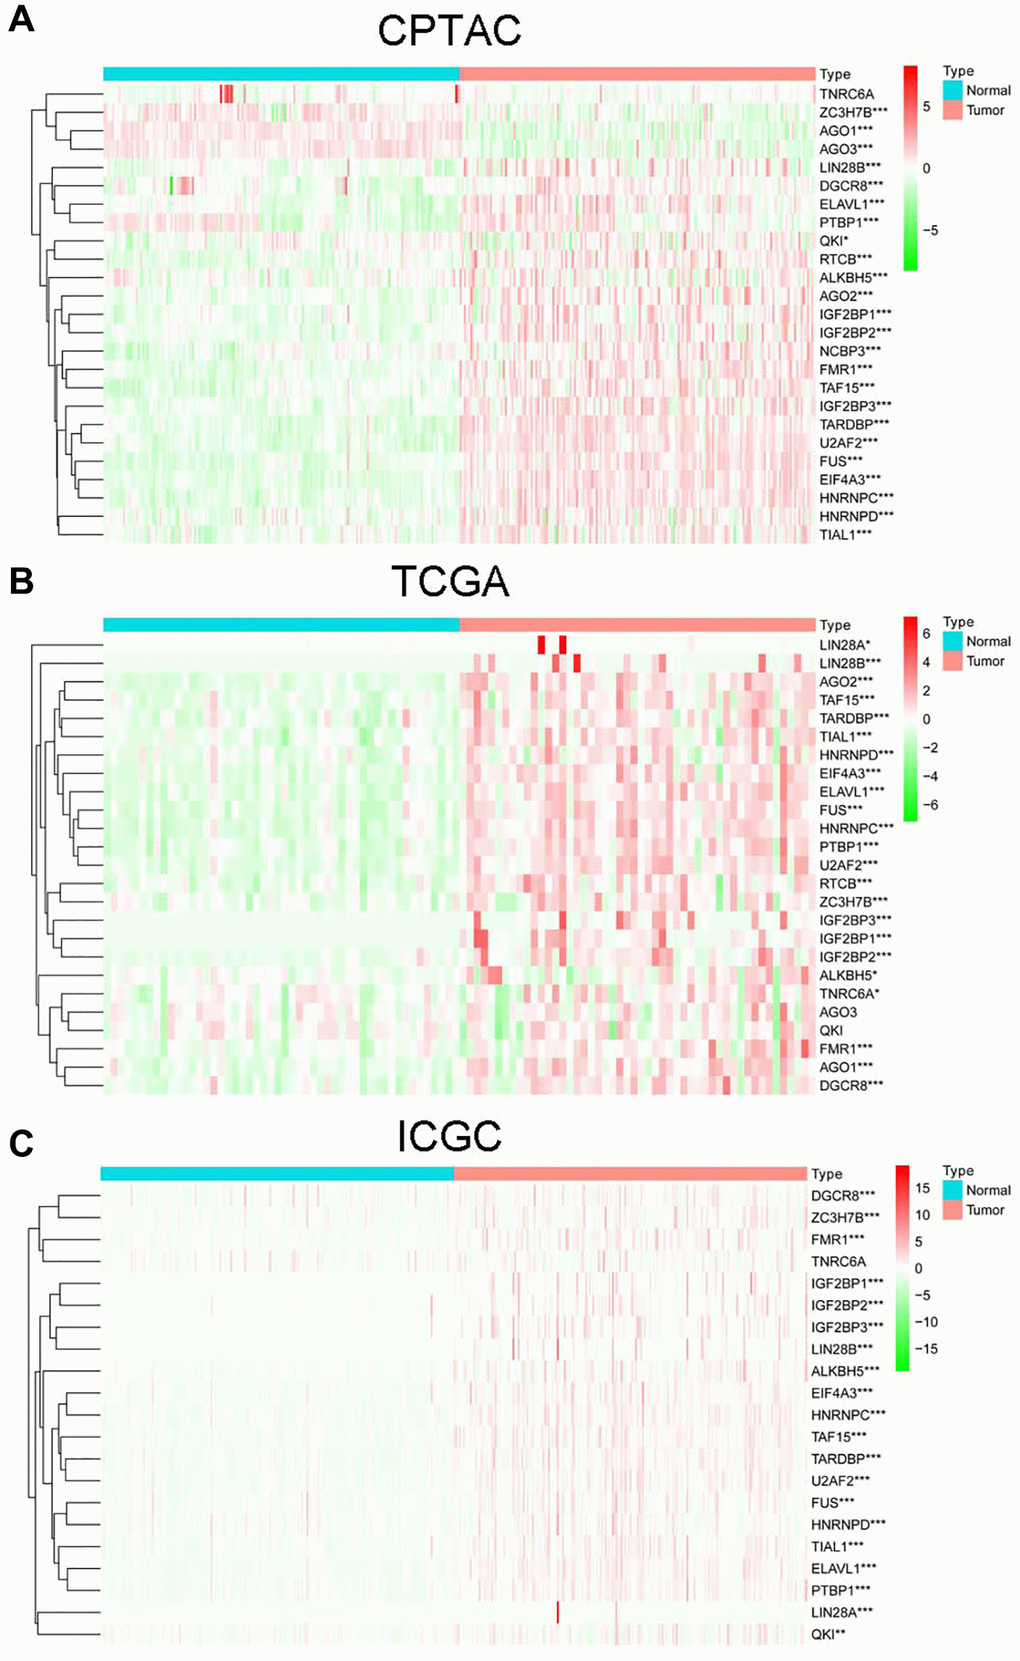 The expression of RBPs in non-tumor and HCC cases from CPTAC (A), TCGA (B) and ICGC (C) projects.